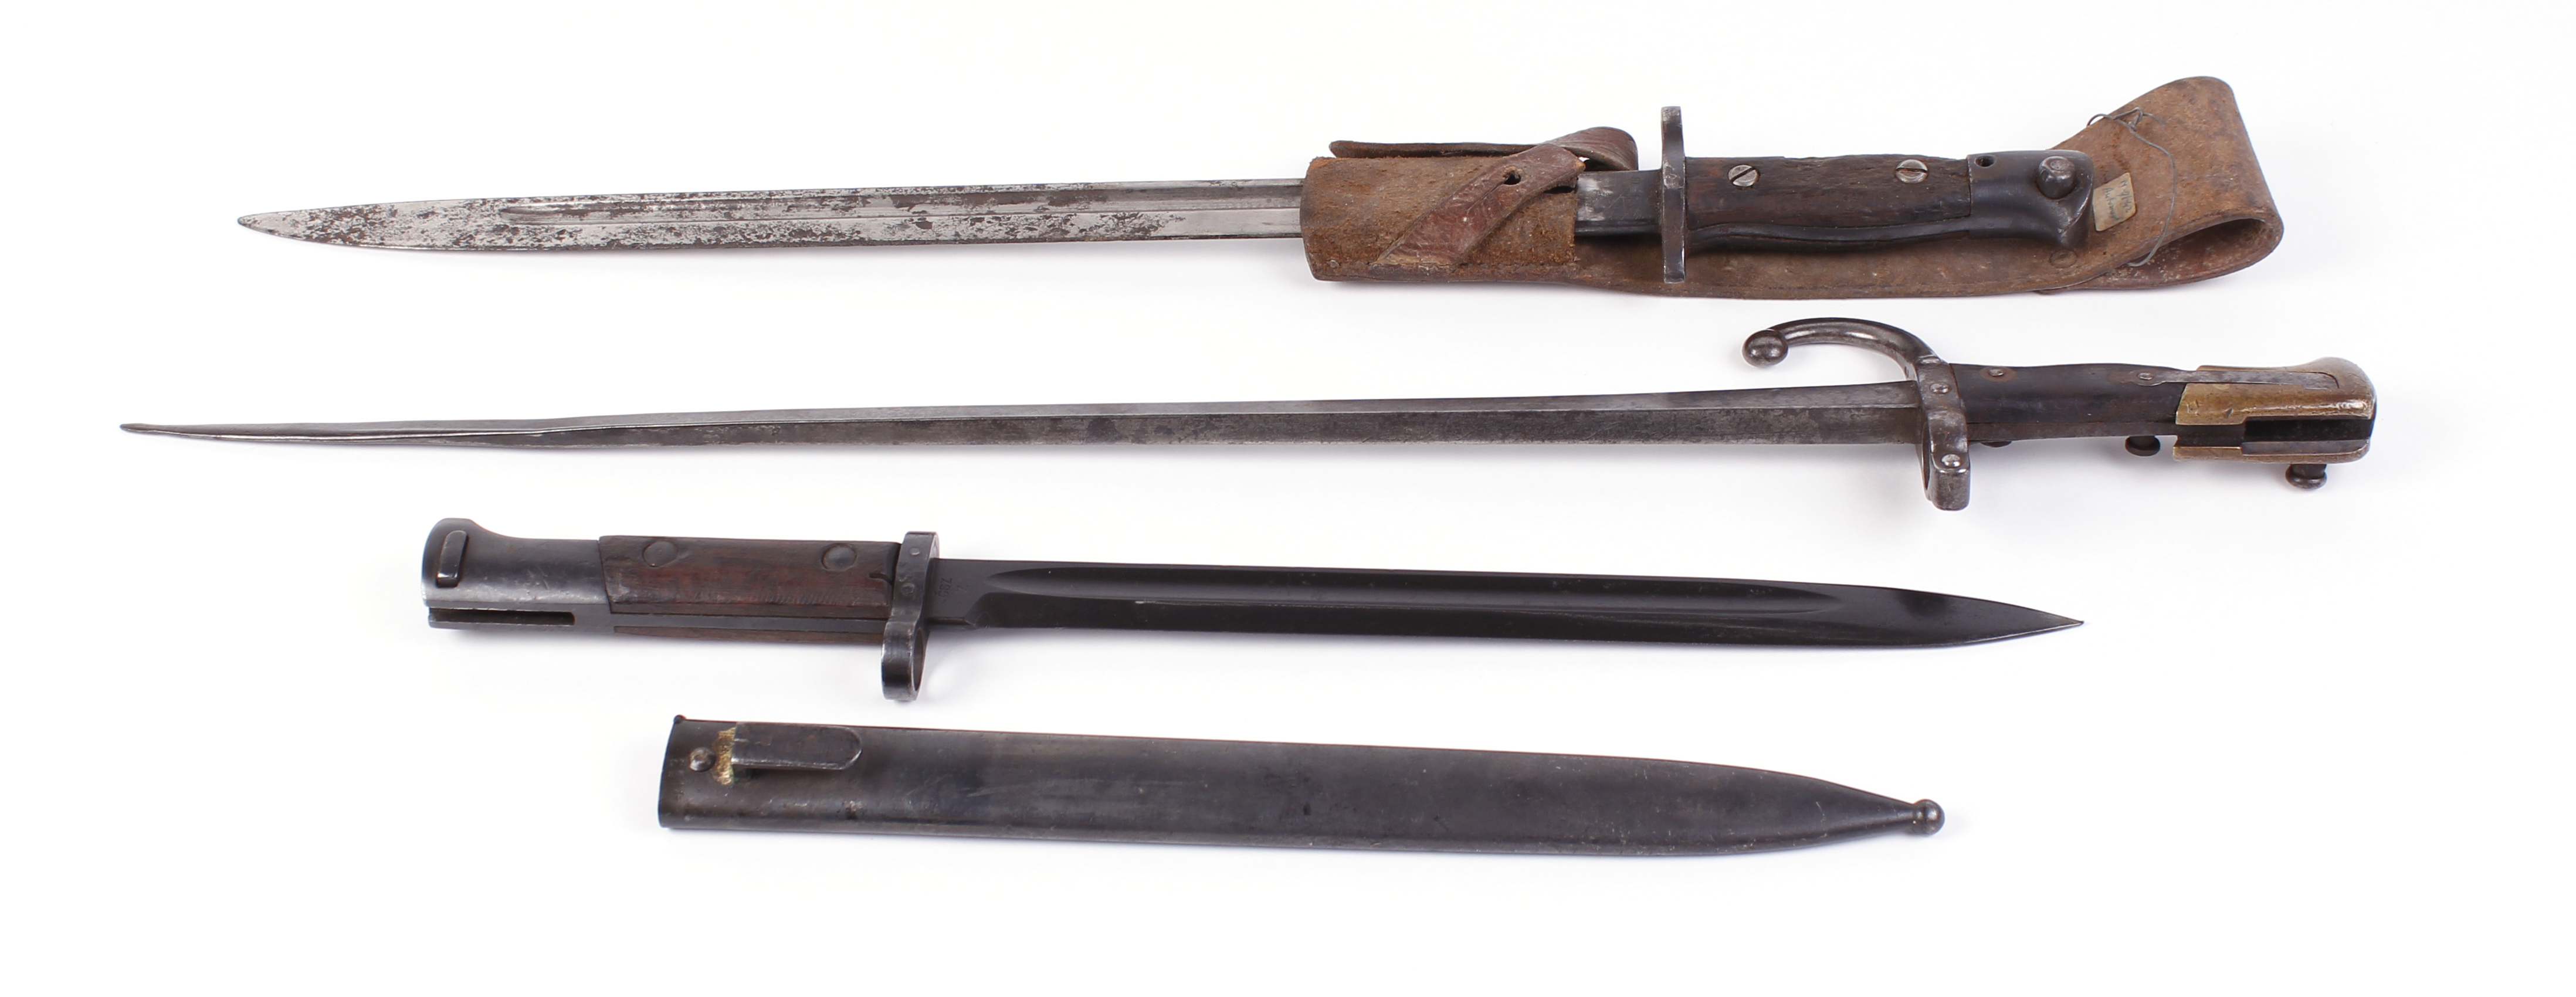 Enfield bayonet with leather frog, Mauser bayonet with scabbard, and another bayonet (3)